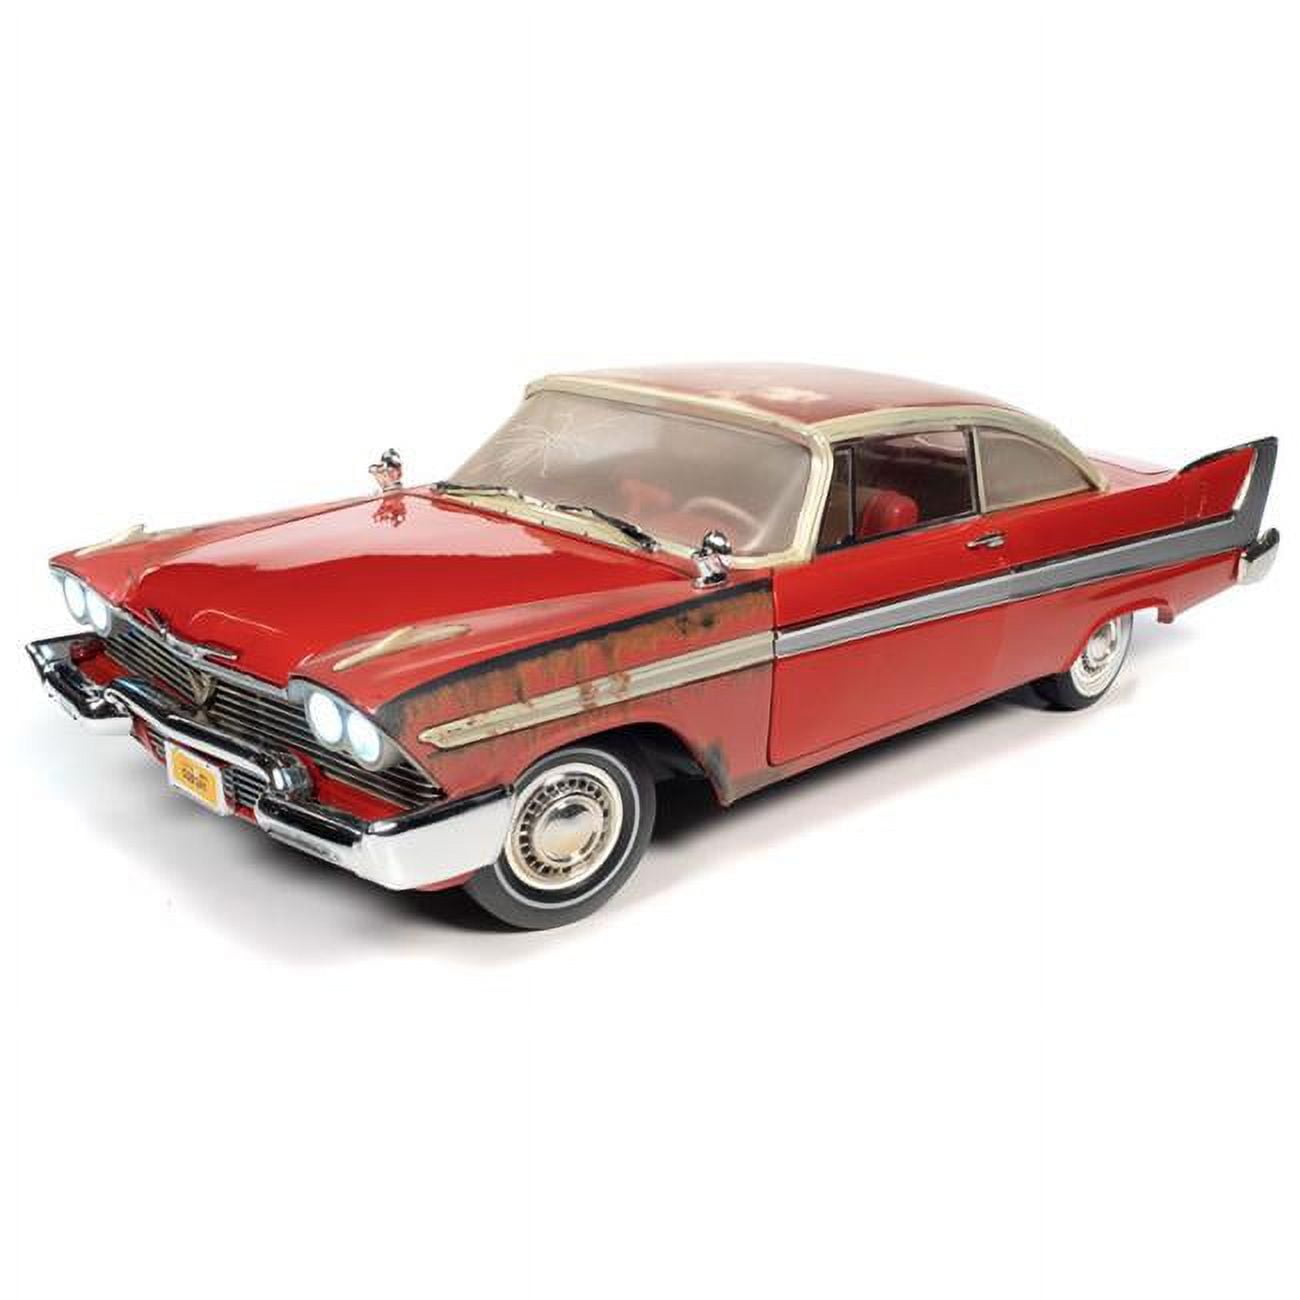 Picture of Auto World AUTAWSS130 Christine 1958 Plymouth Fury Model Car - Partially Restored in Dirty Red